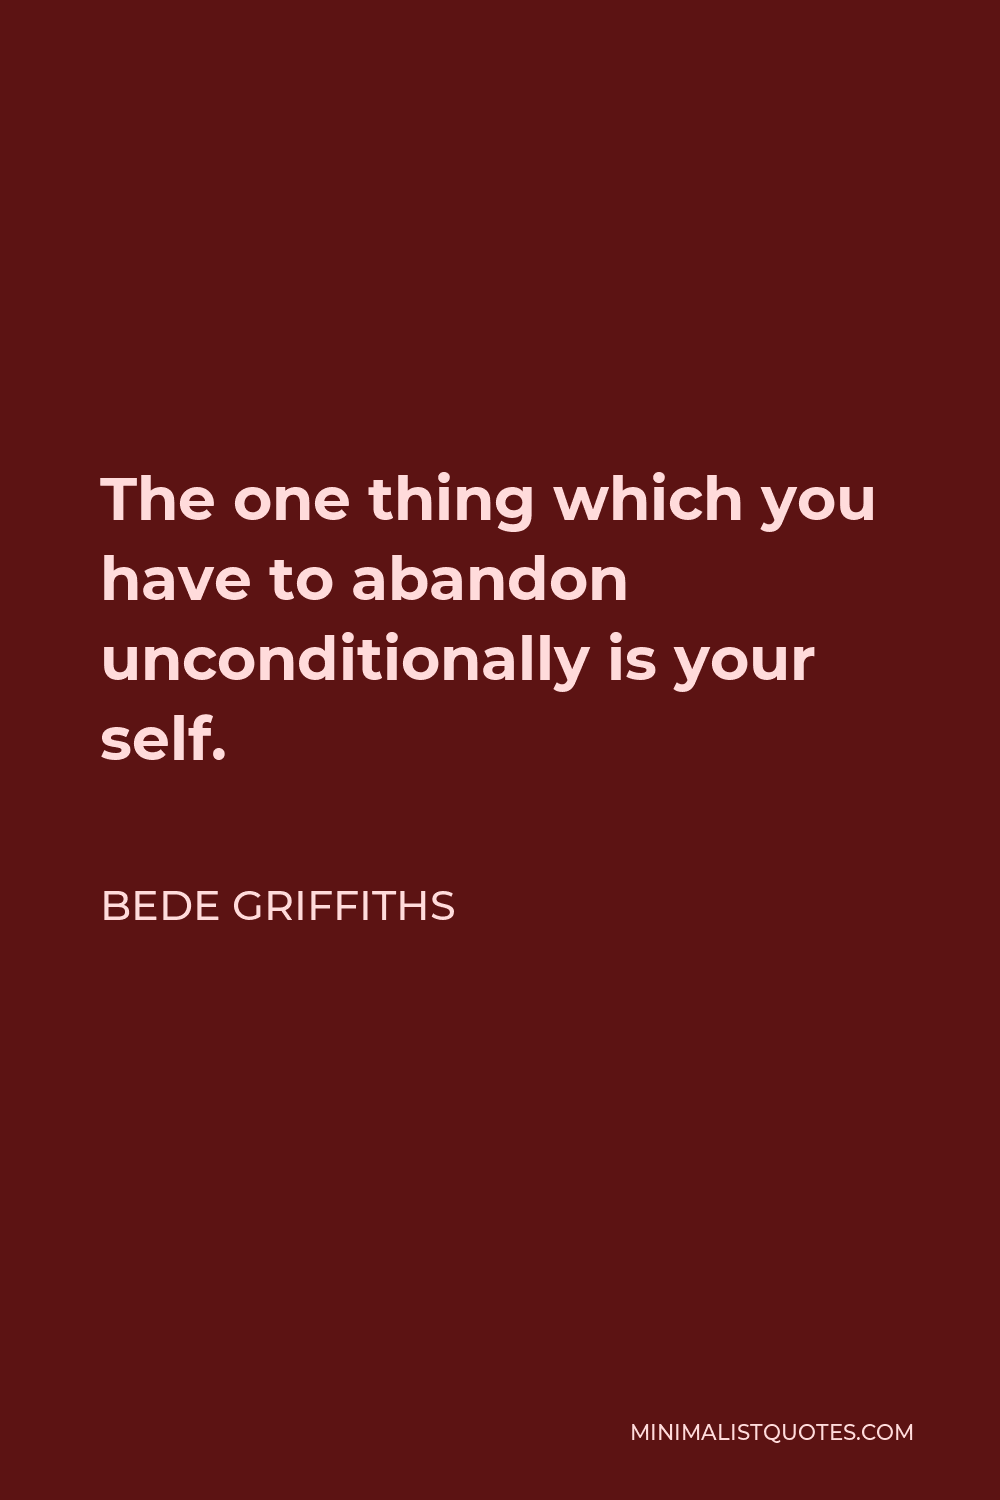 Bede Griffiths Quote - The one thing which you have to abandon unconditionally is your self.